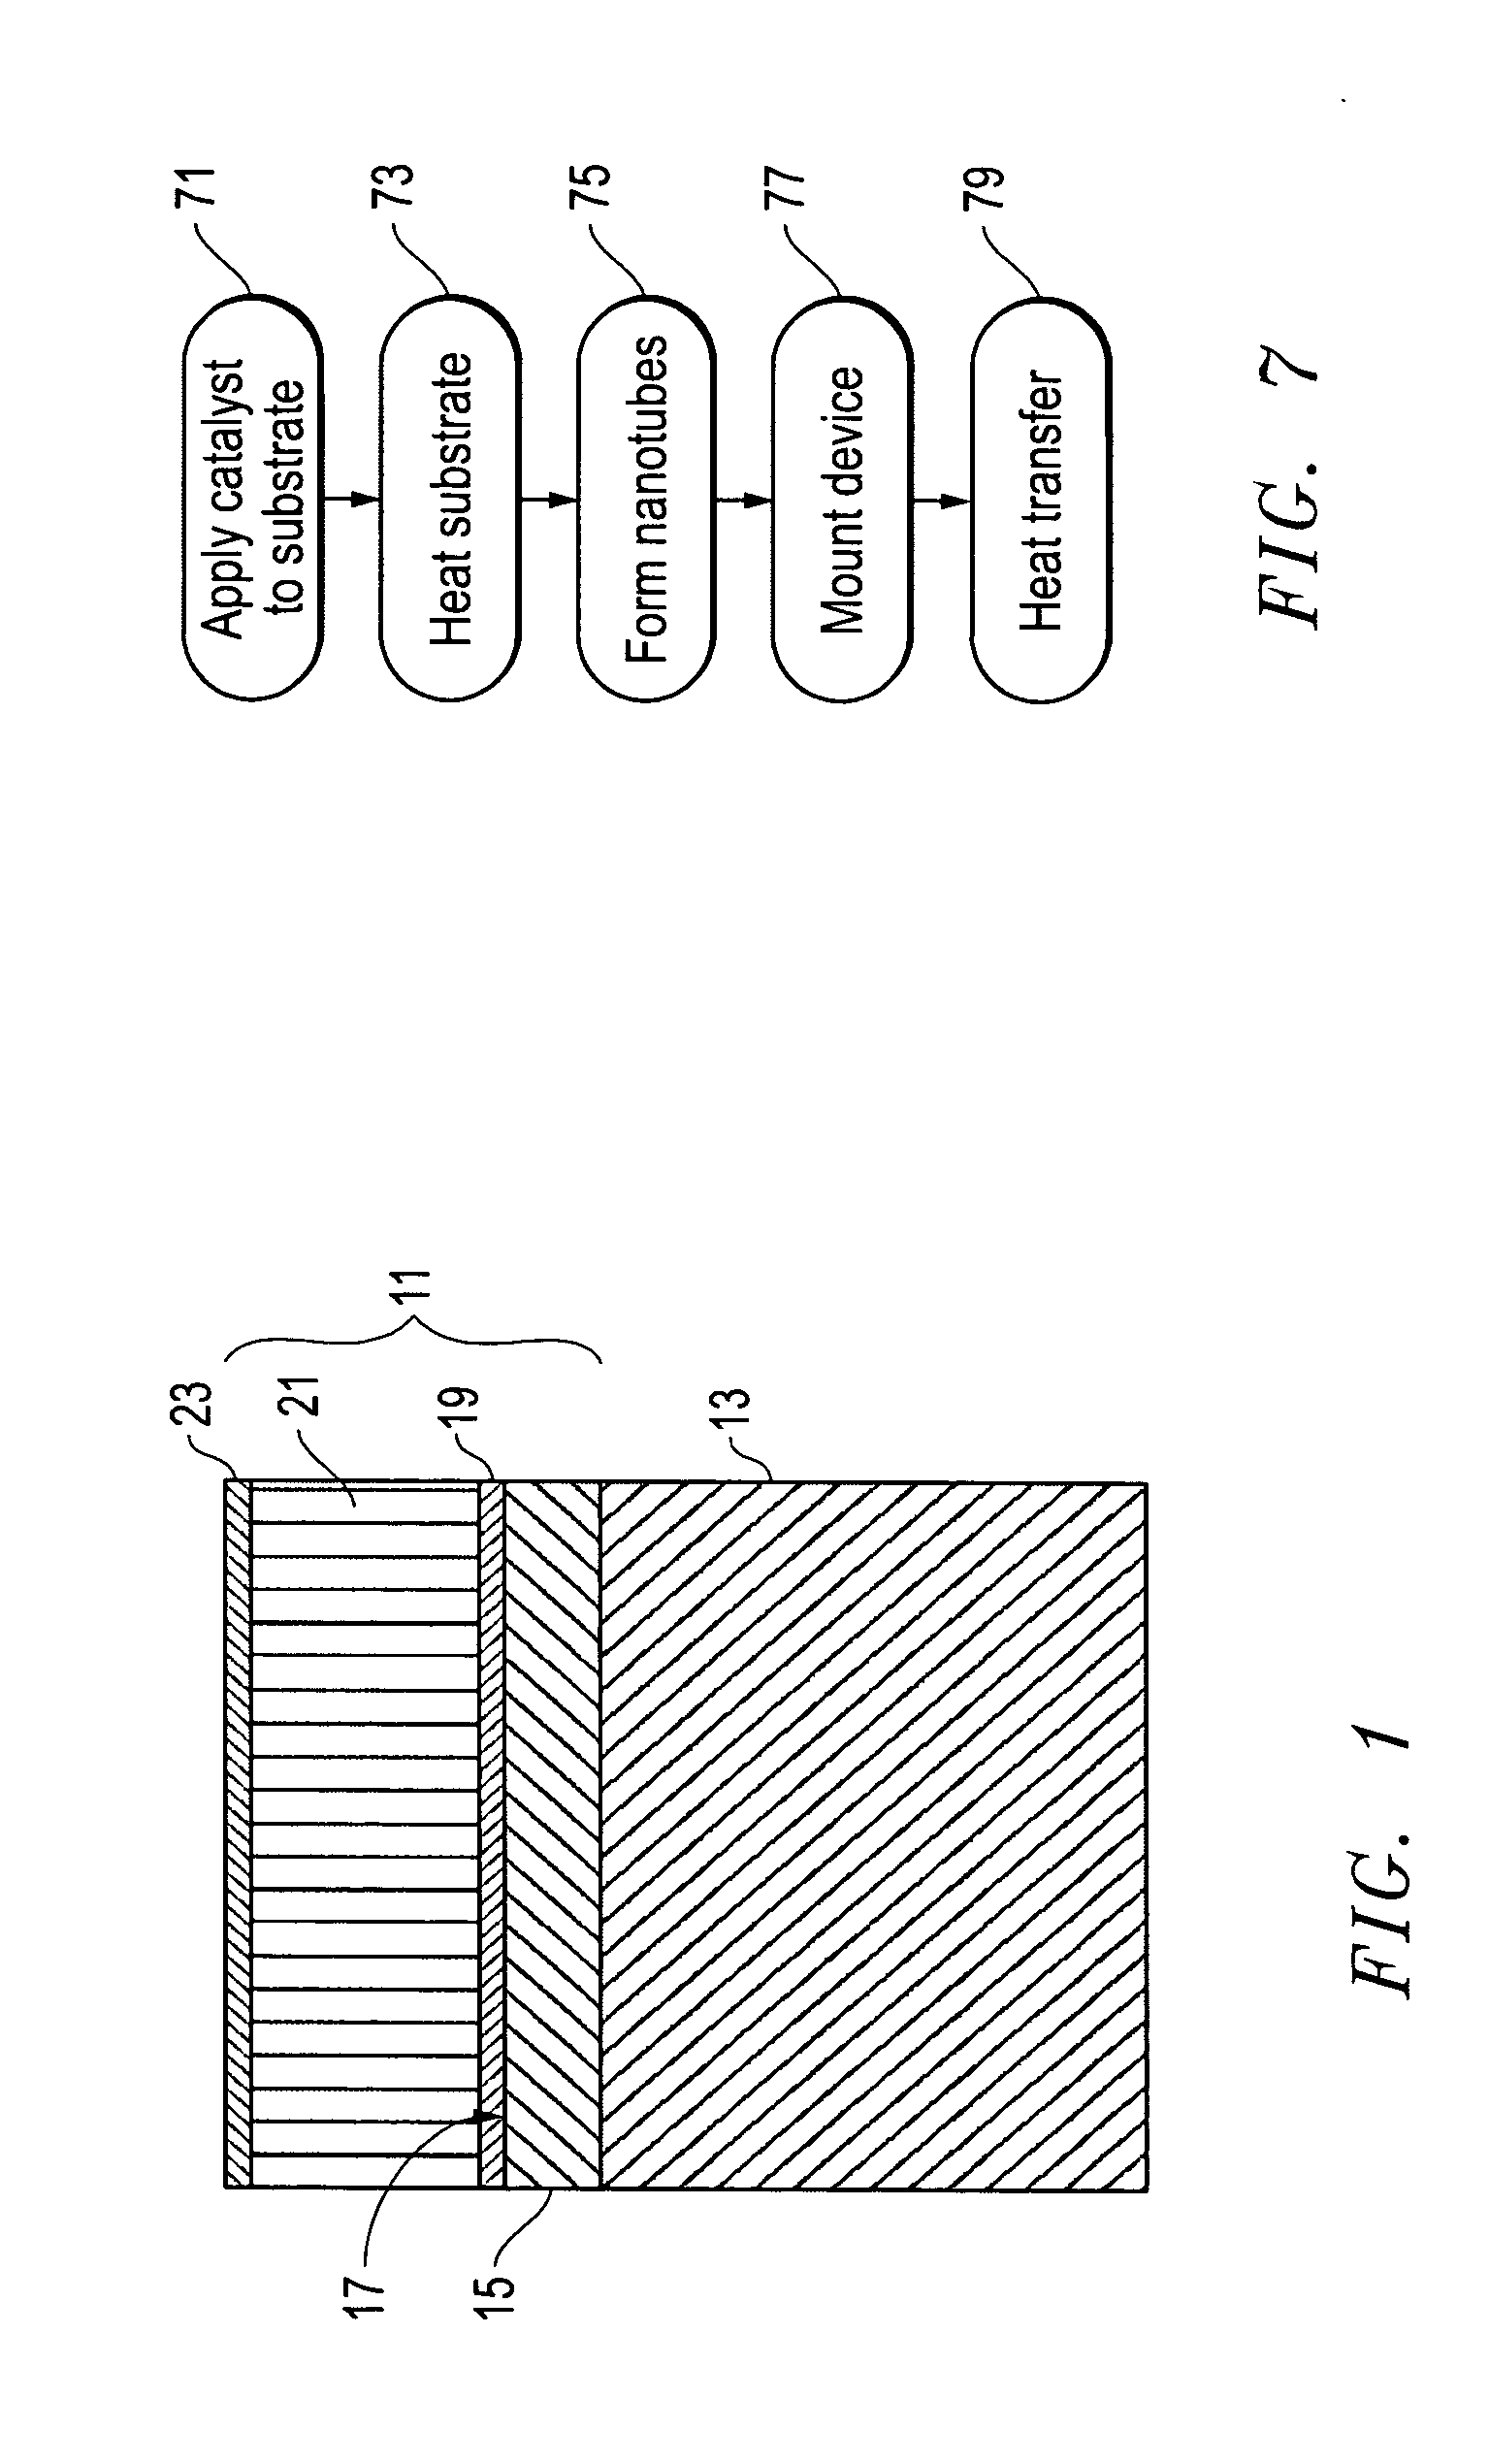 System, method, and apparatus for producing high efficiency heat transfer device with carbon nanotubes